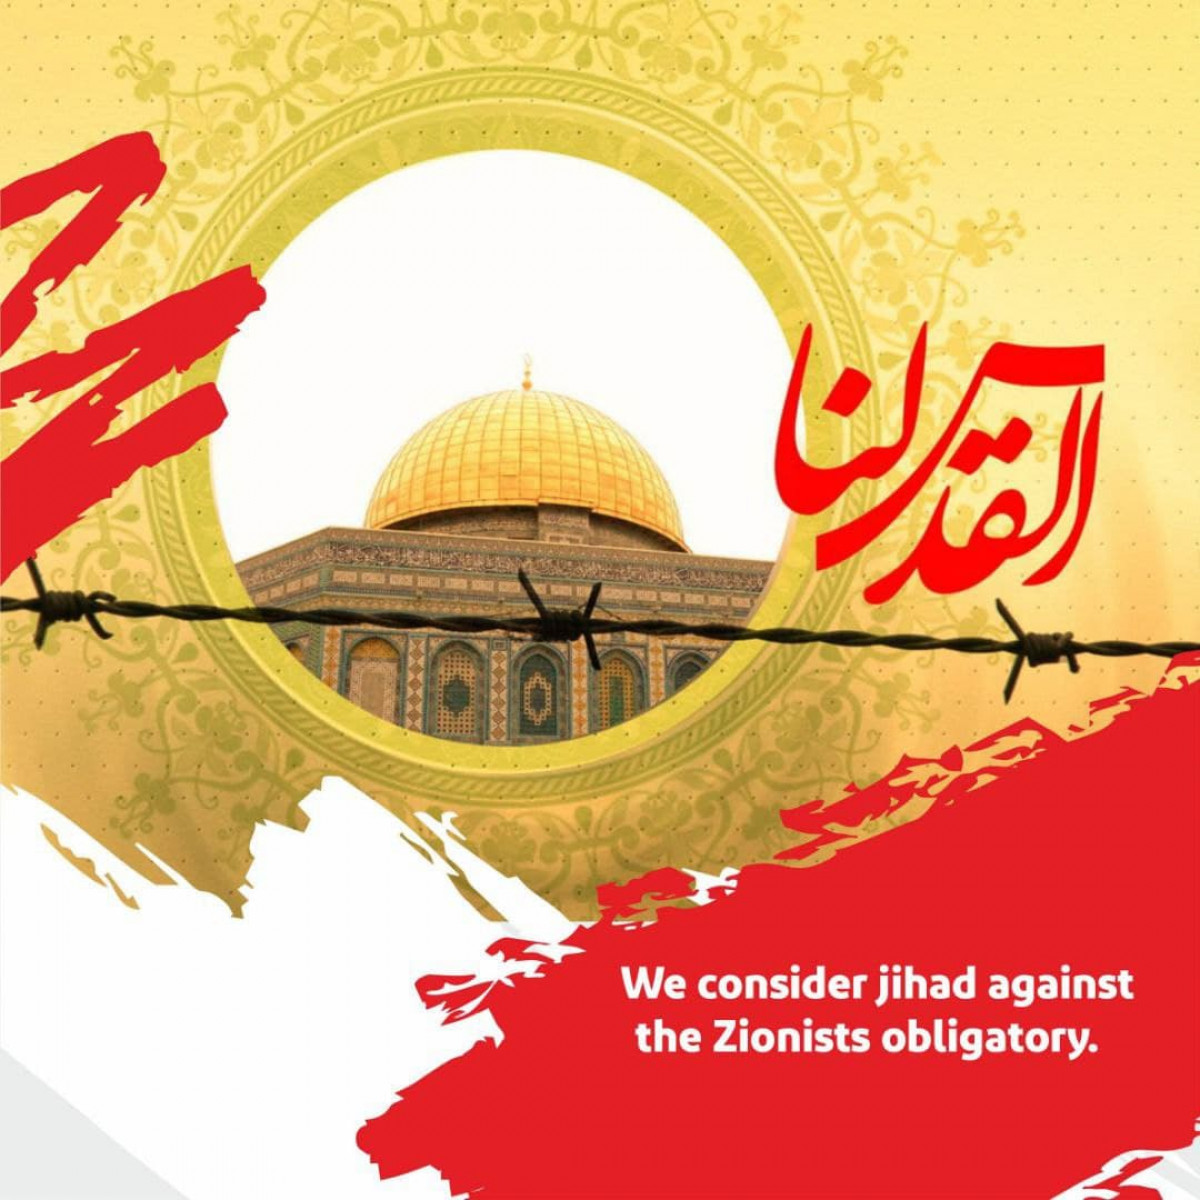 We consider jihad against the Zionists obligatory